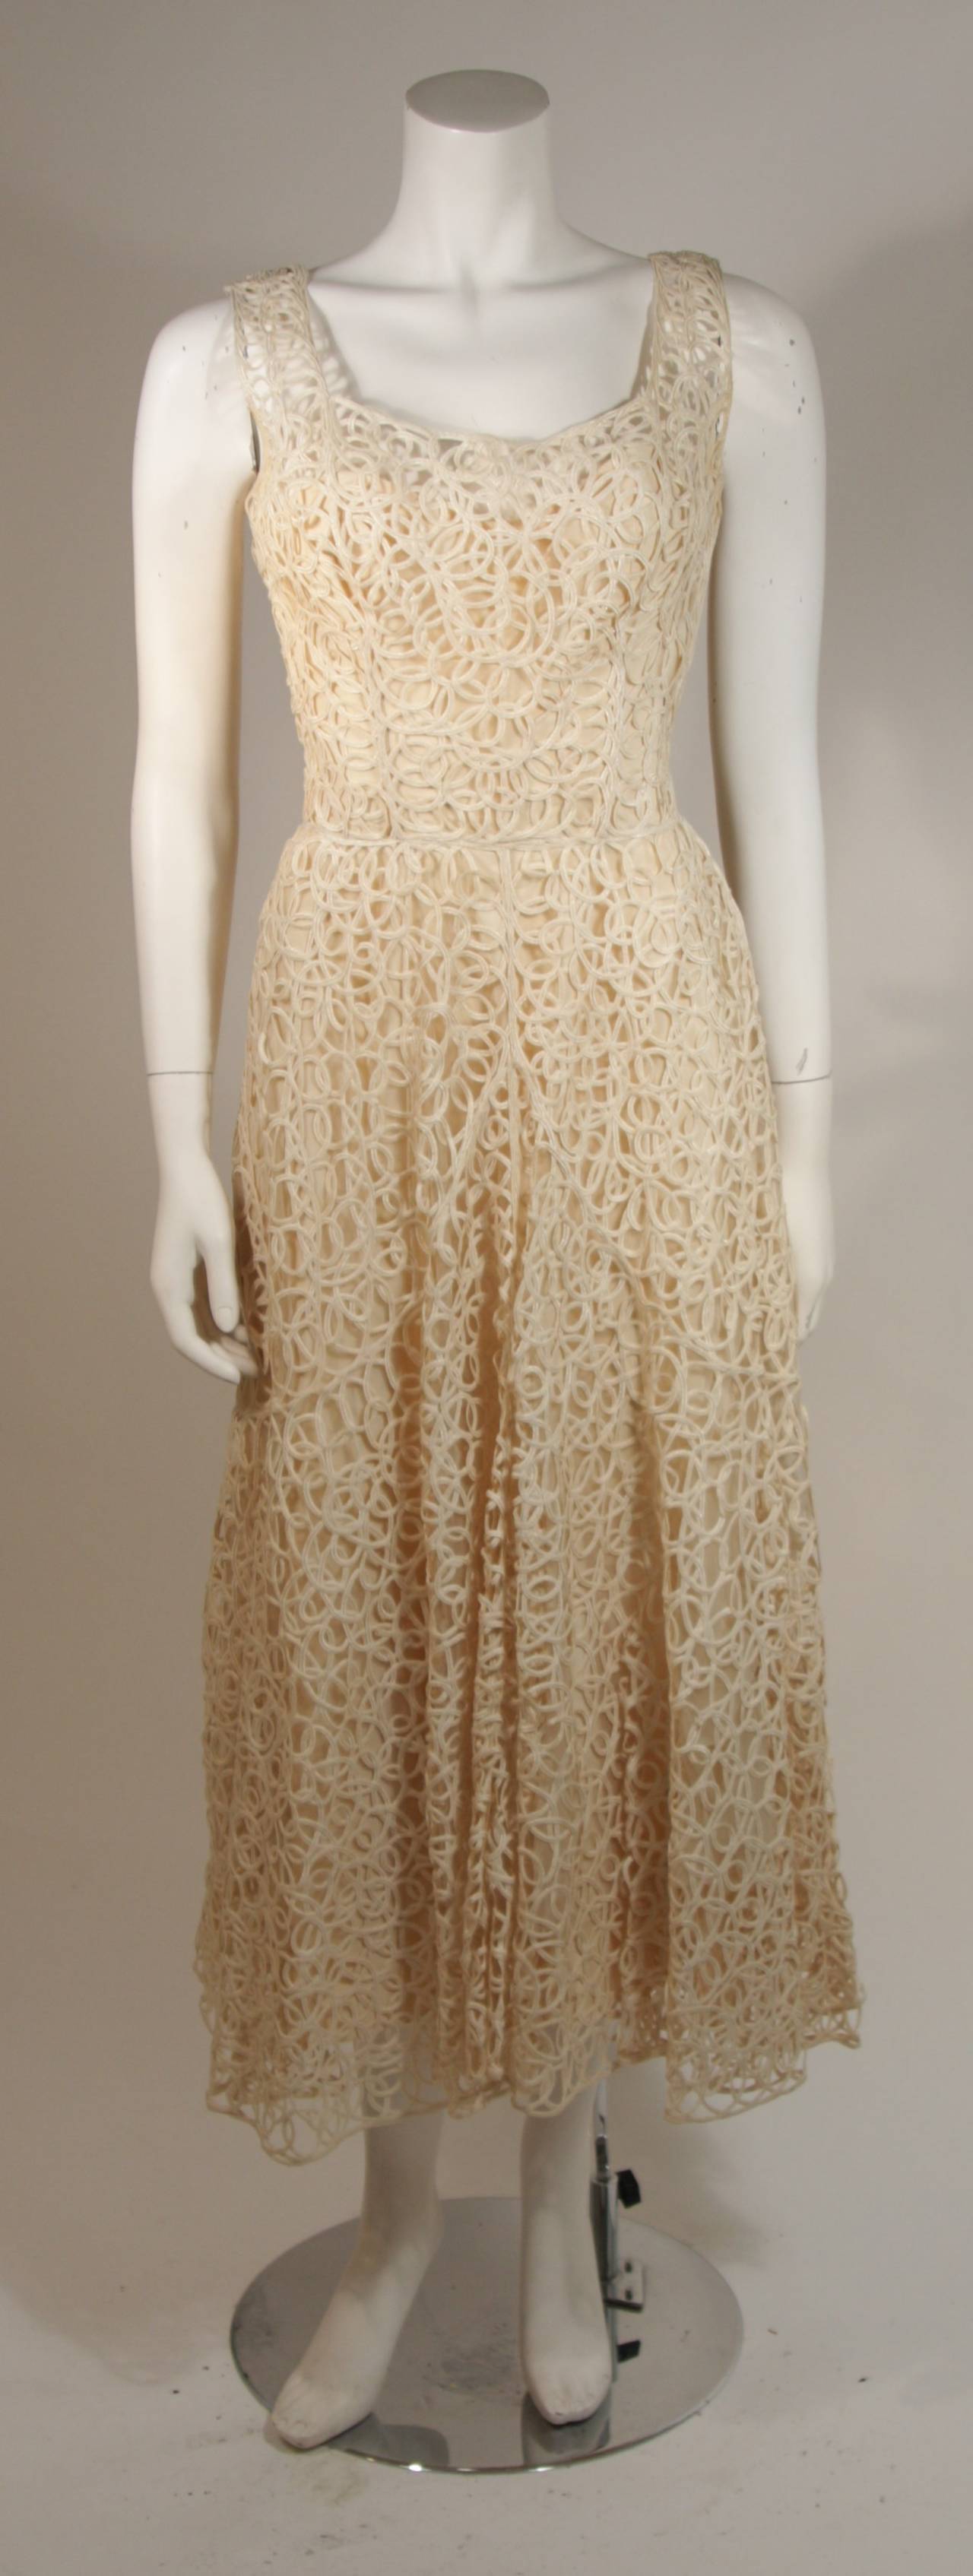 This Ceil Chapman cocktail dress is composed of a fabulous cream lattice work lace. There is a side zipper for ease of access. There is slight discoloration, but otherwise the dress is in Excellent Vintage Condition.  

Measures